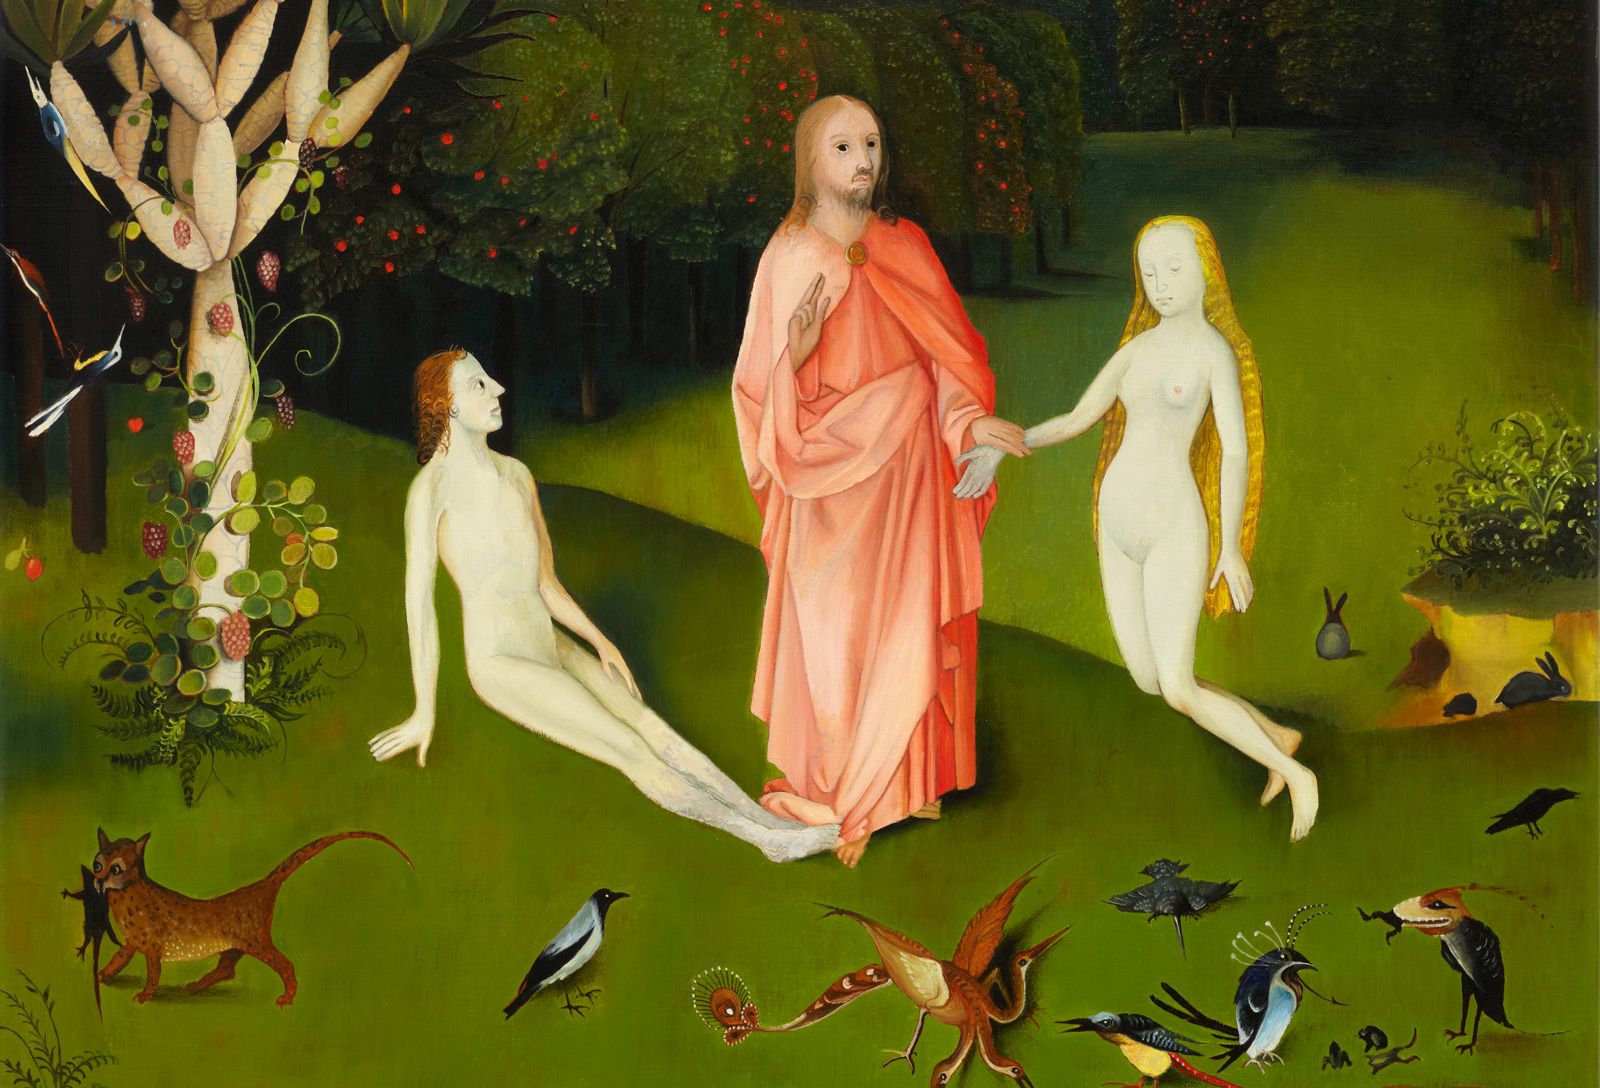 Intricate reimagining of Hieronymus Bosch’s magnum opus, "The Garden of Earthly Delights" (1490-1510) - God with Adam and Eve.